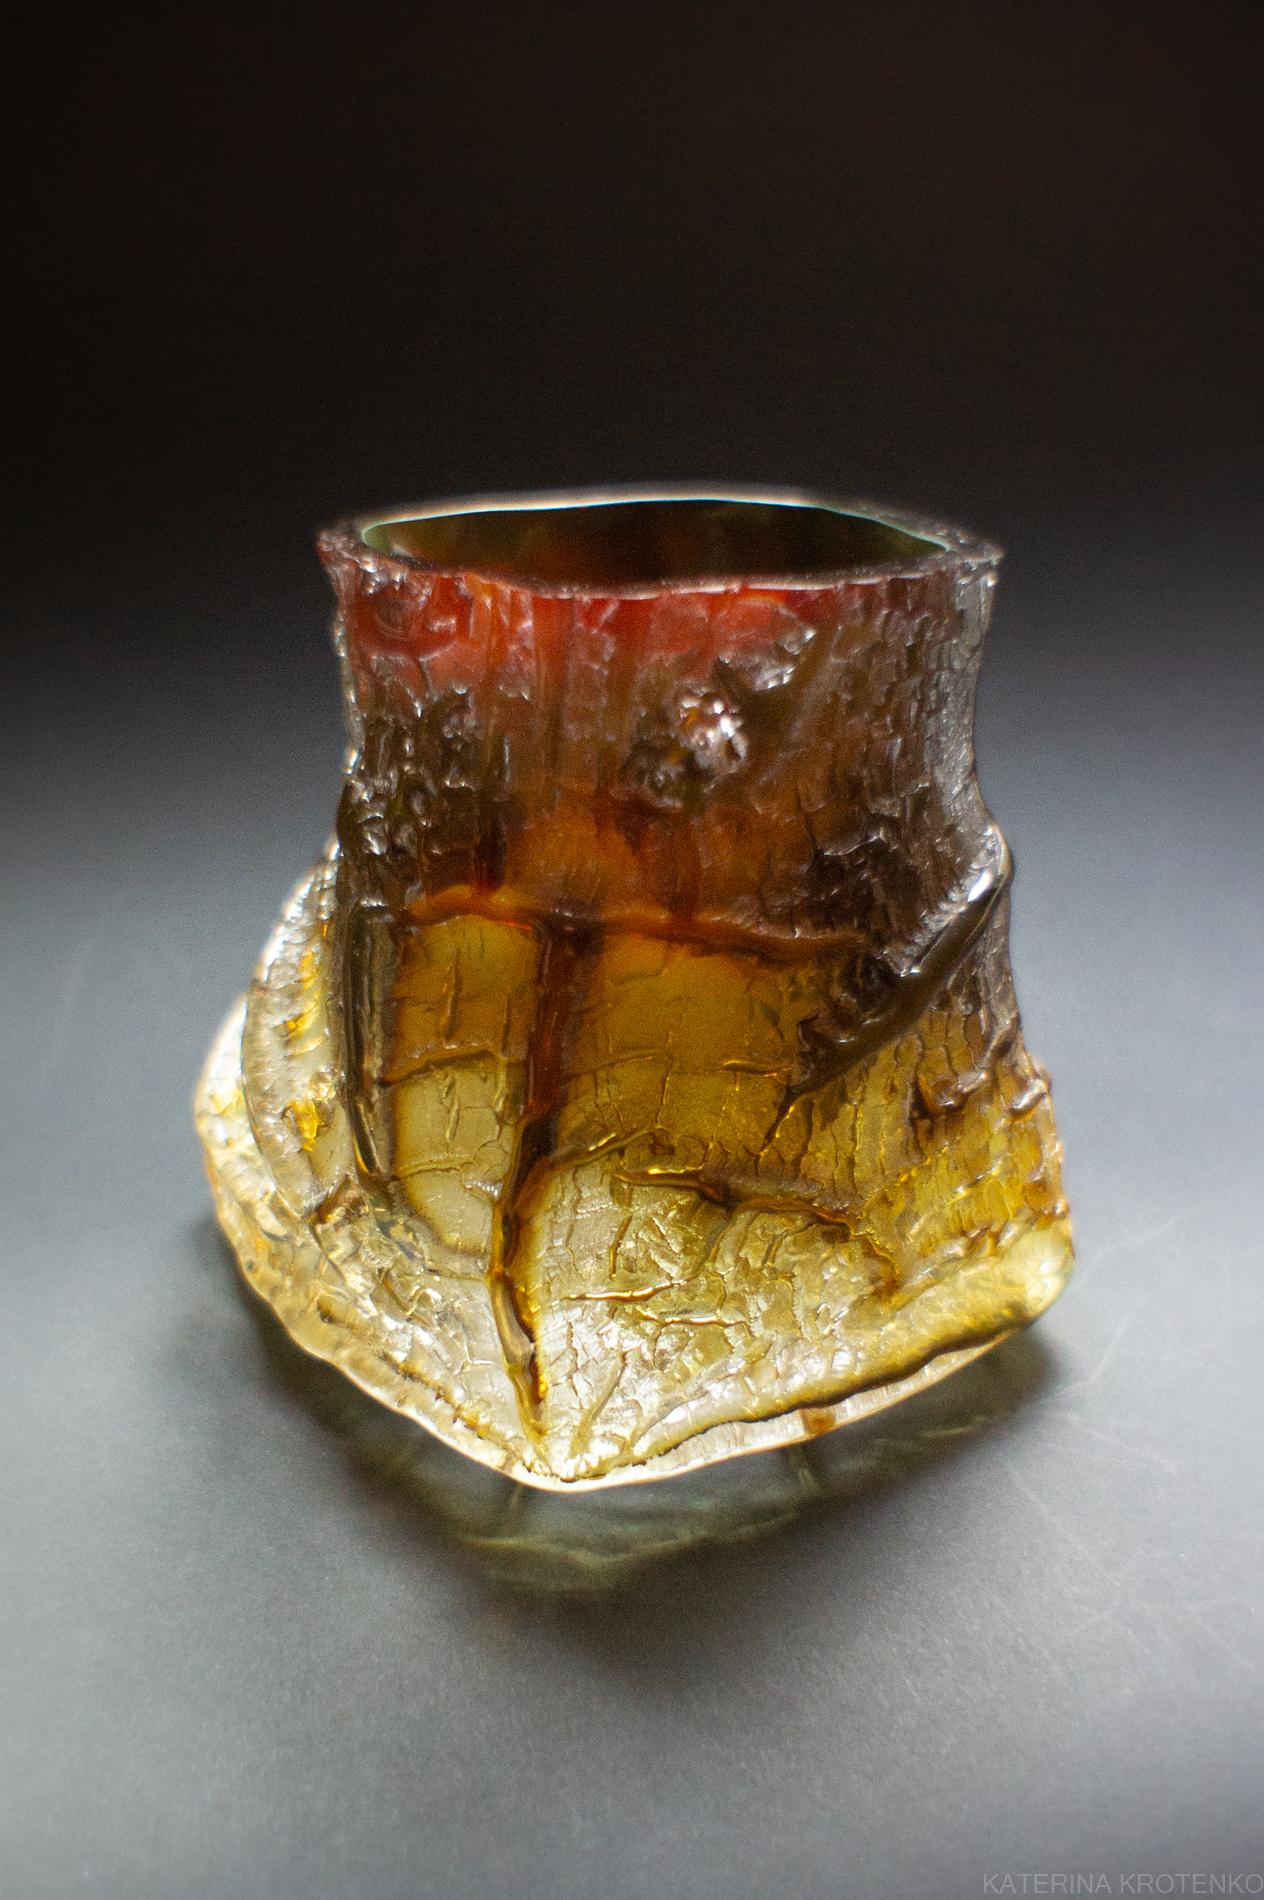 glass treasury, volume IX no. 7 & 8, golden & grounded brown

Drago is a sculptural glassware that explores the concept of a treasury —  the power of a container object to reflect the value of personally precious ingredients or material entities